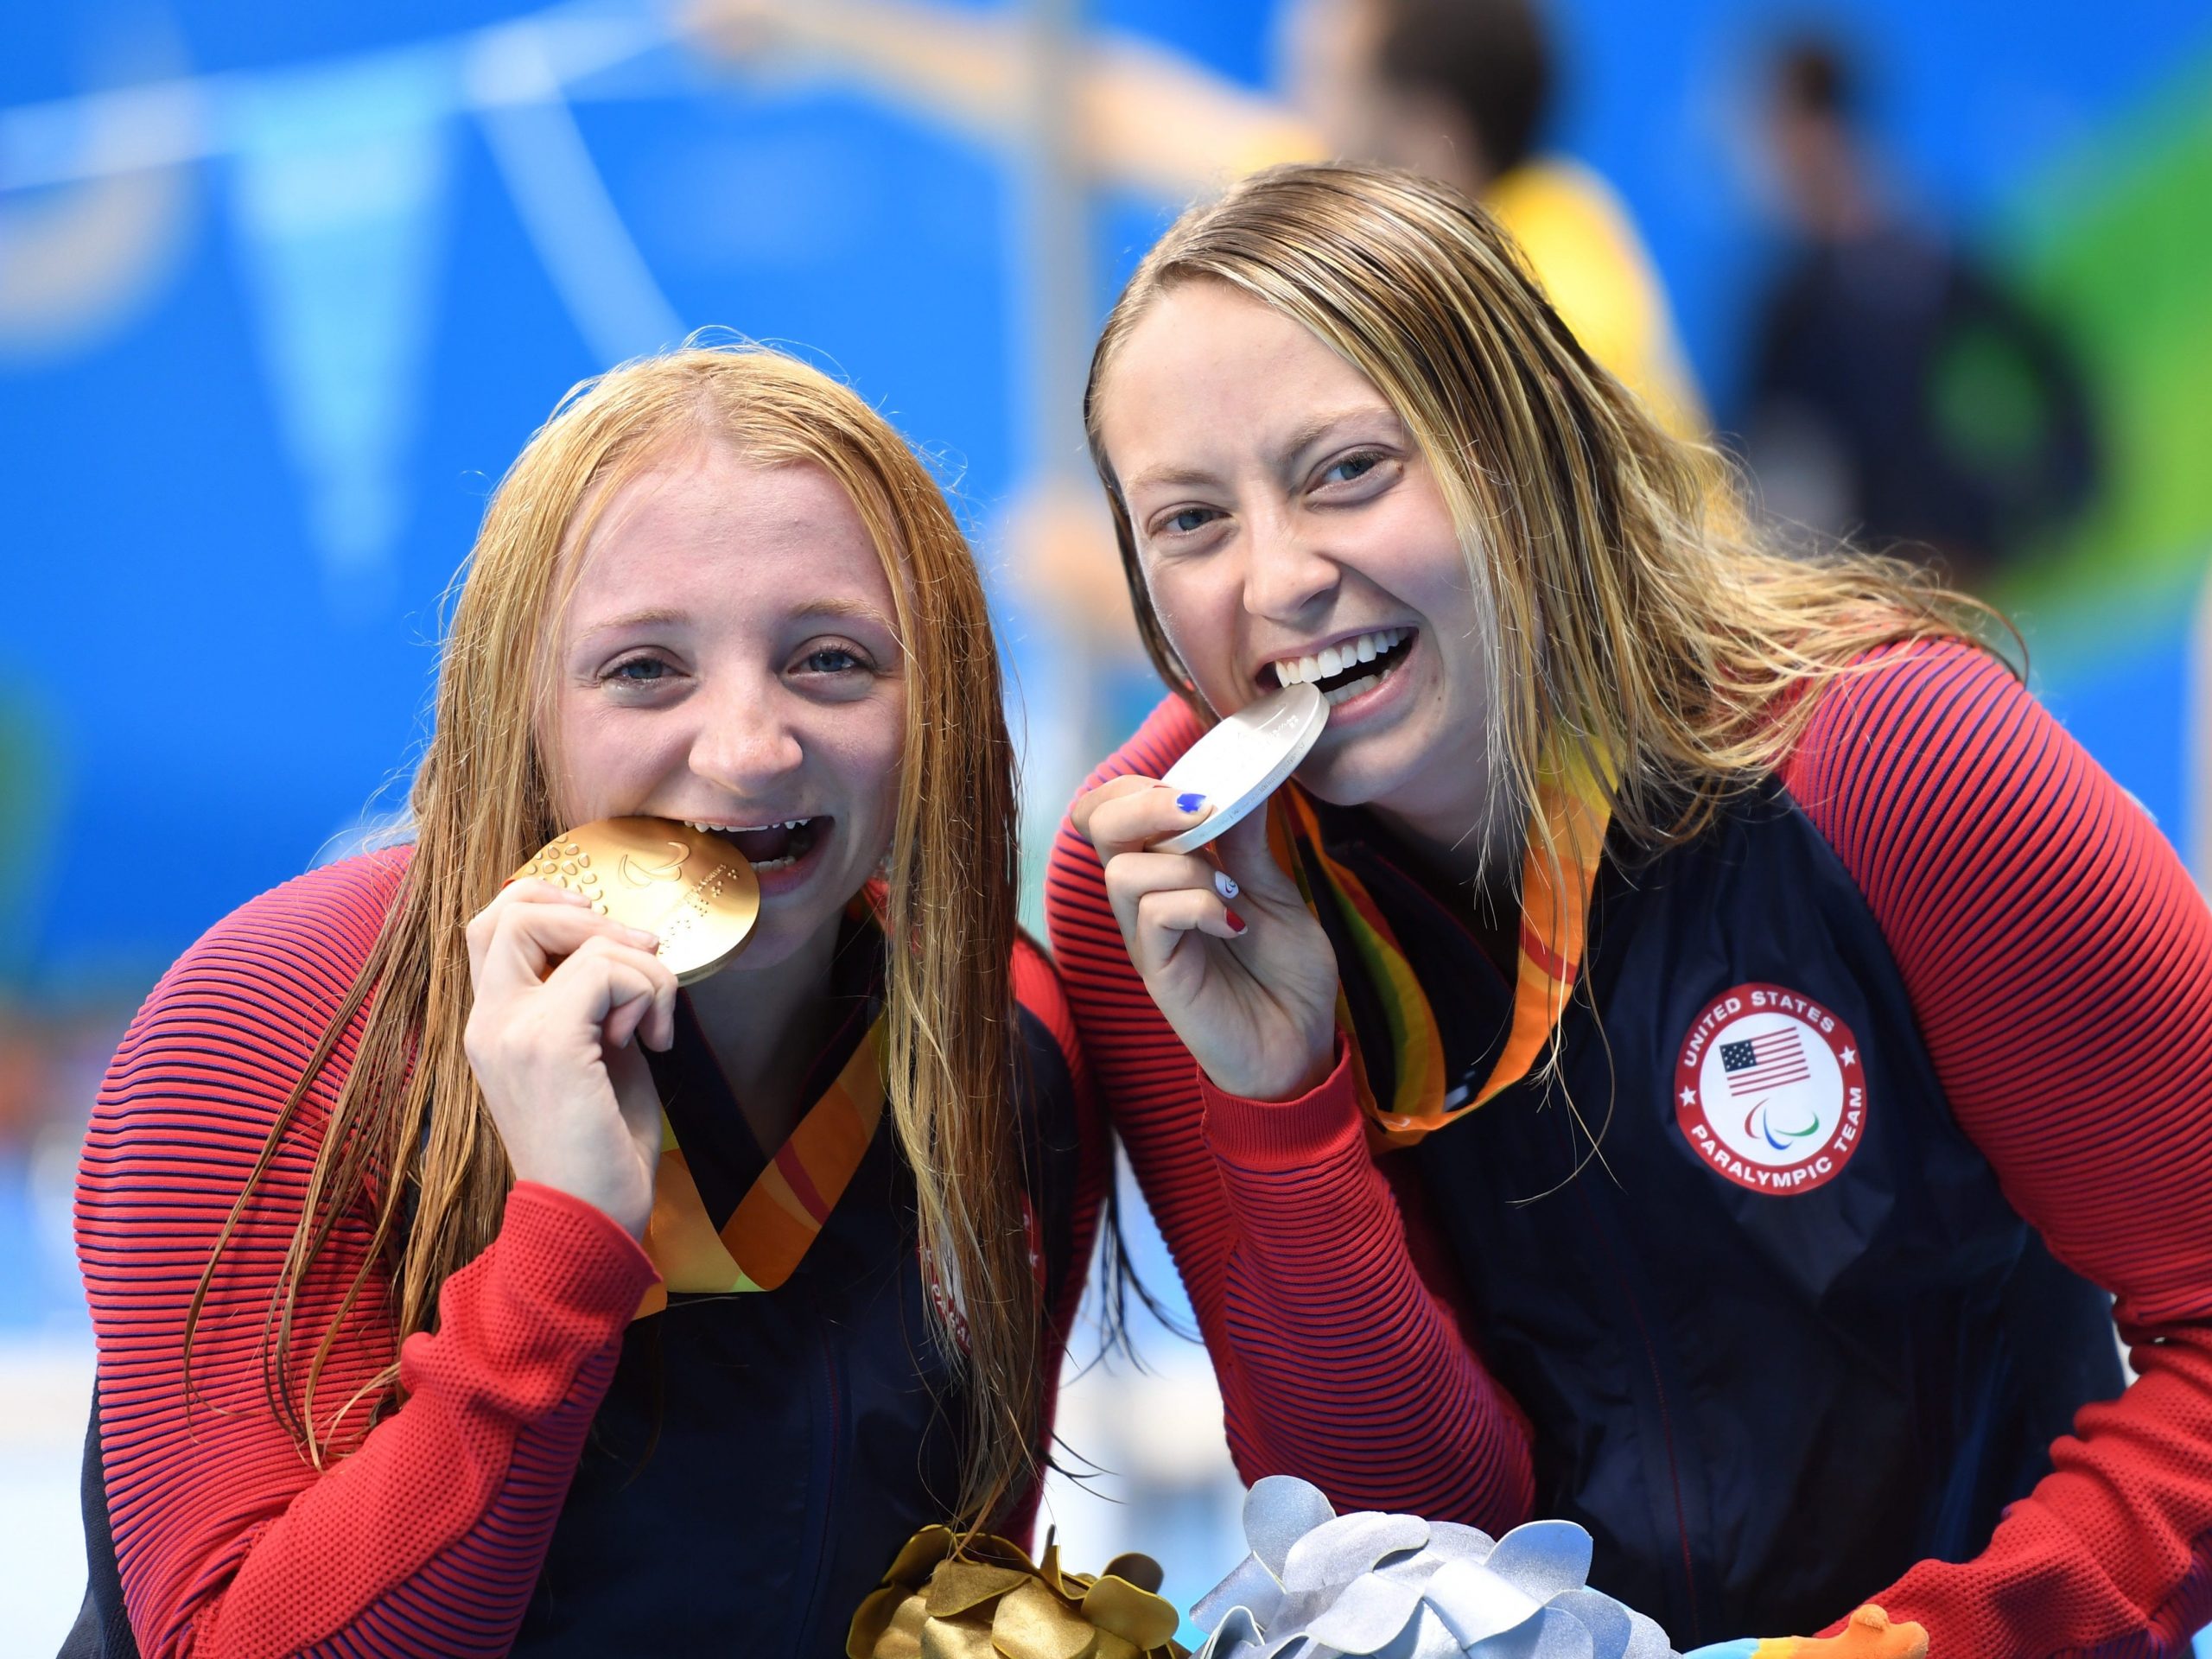 Gold medalist McKenzie Coan and silver medalist Cortney Jordan at the 2016 Paralympic Games in Rio.